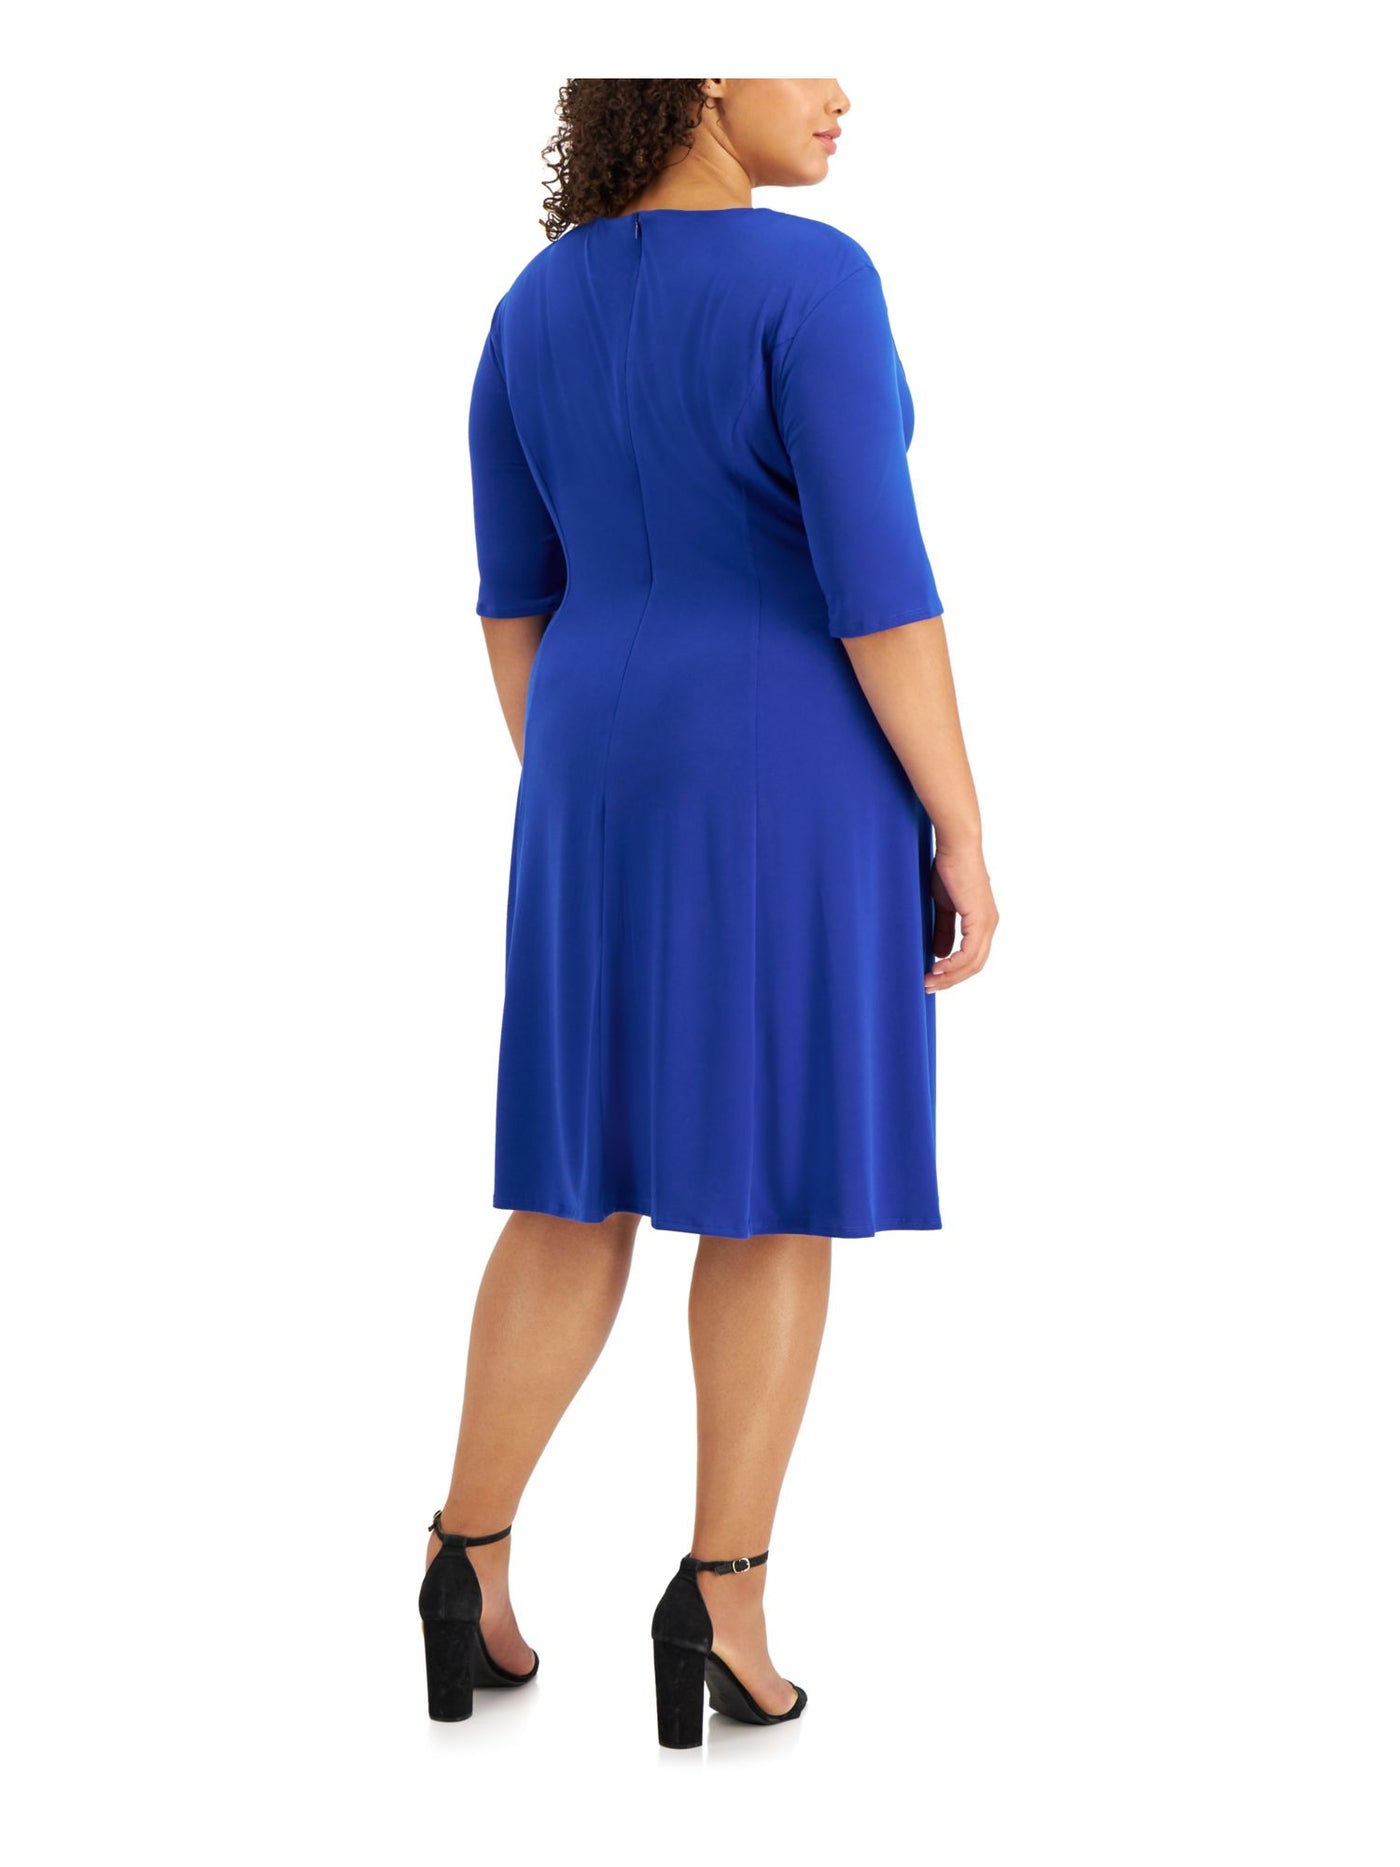 LONDON TIMES WOMAN Womens Blue Stretch Zippered Round Neck With Cutouts Elbow Sleeve Knee Length Wear To Work Fit + Flare Dress Plus 22W